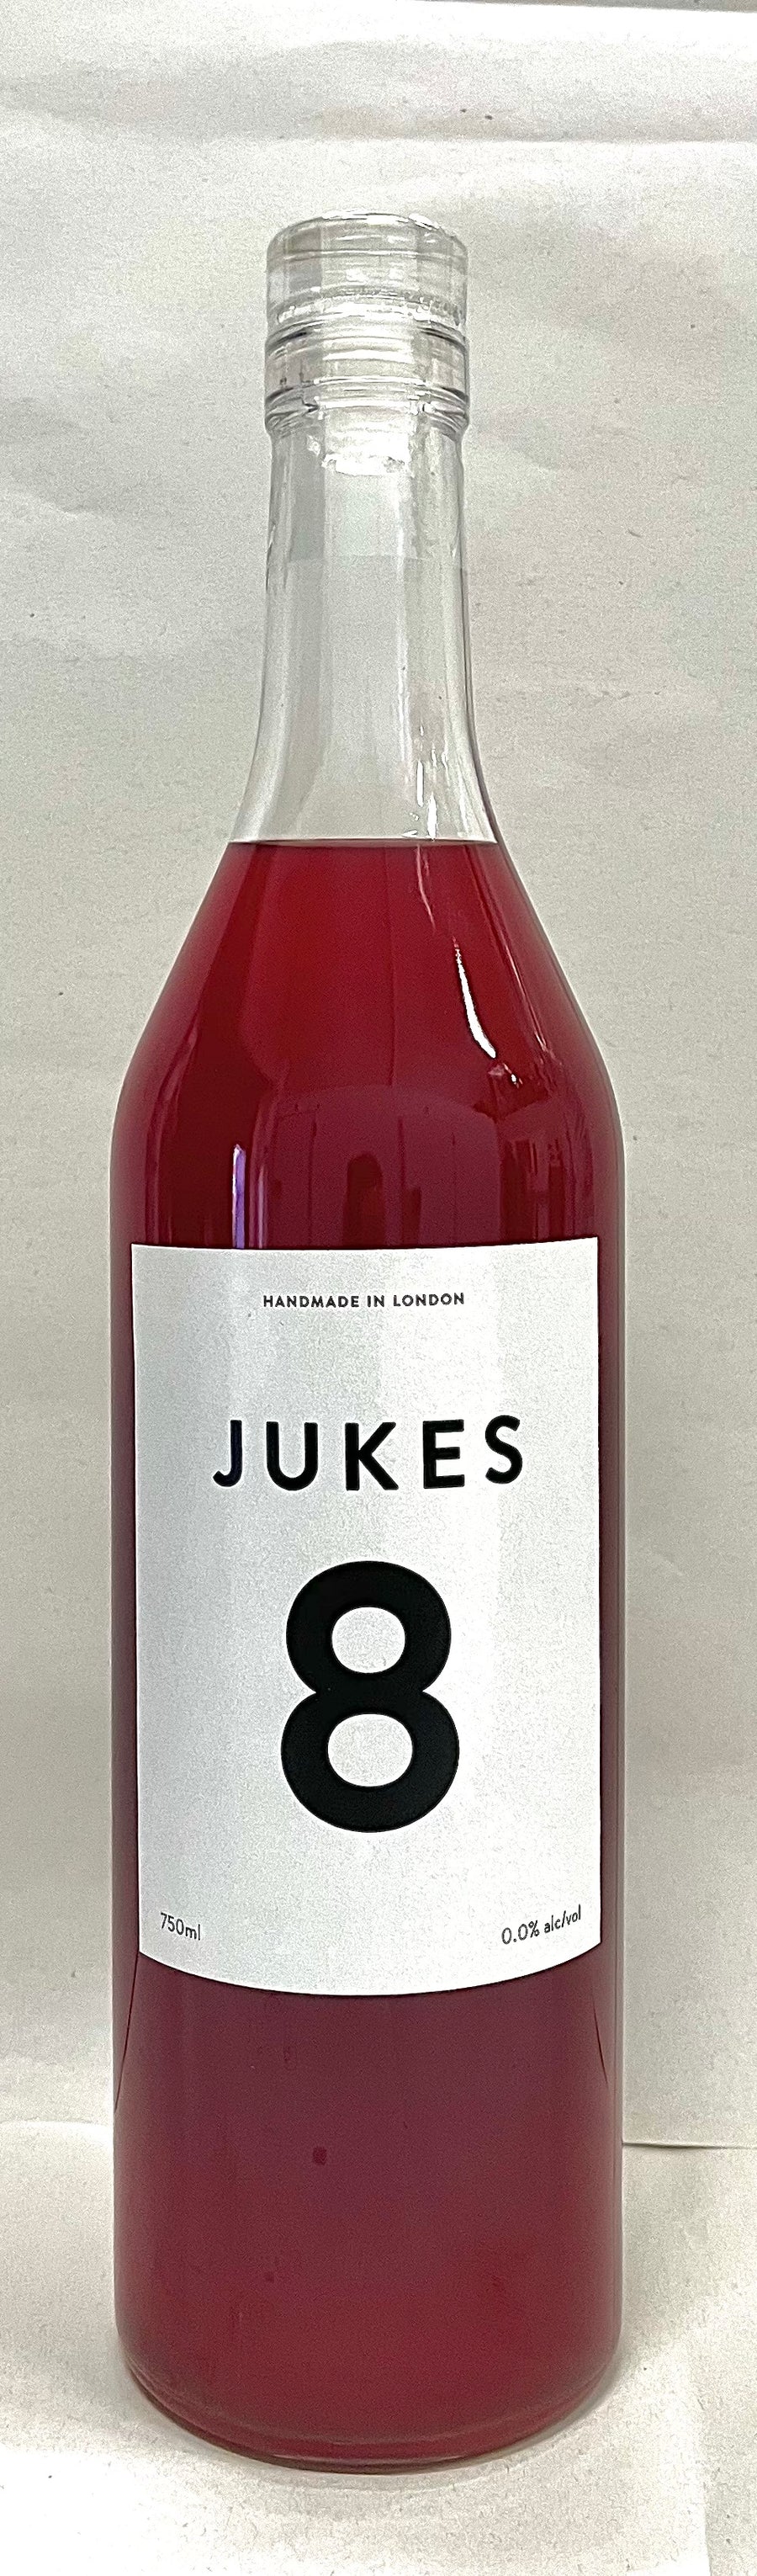 Jukes - 8 - The Rosé - Non-Alcoholic Cordial 750ml - Boisson — Brooklyn's Non-Alcoholic Spirits, Beer, Wine, and Home Bar Shop in Cobble Hill